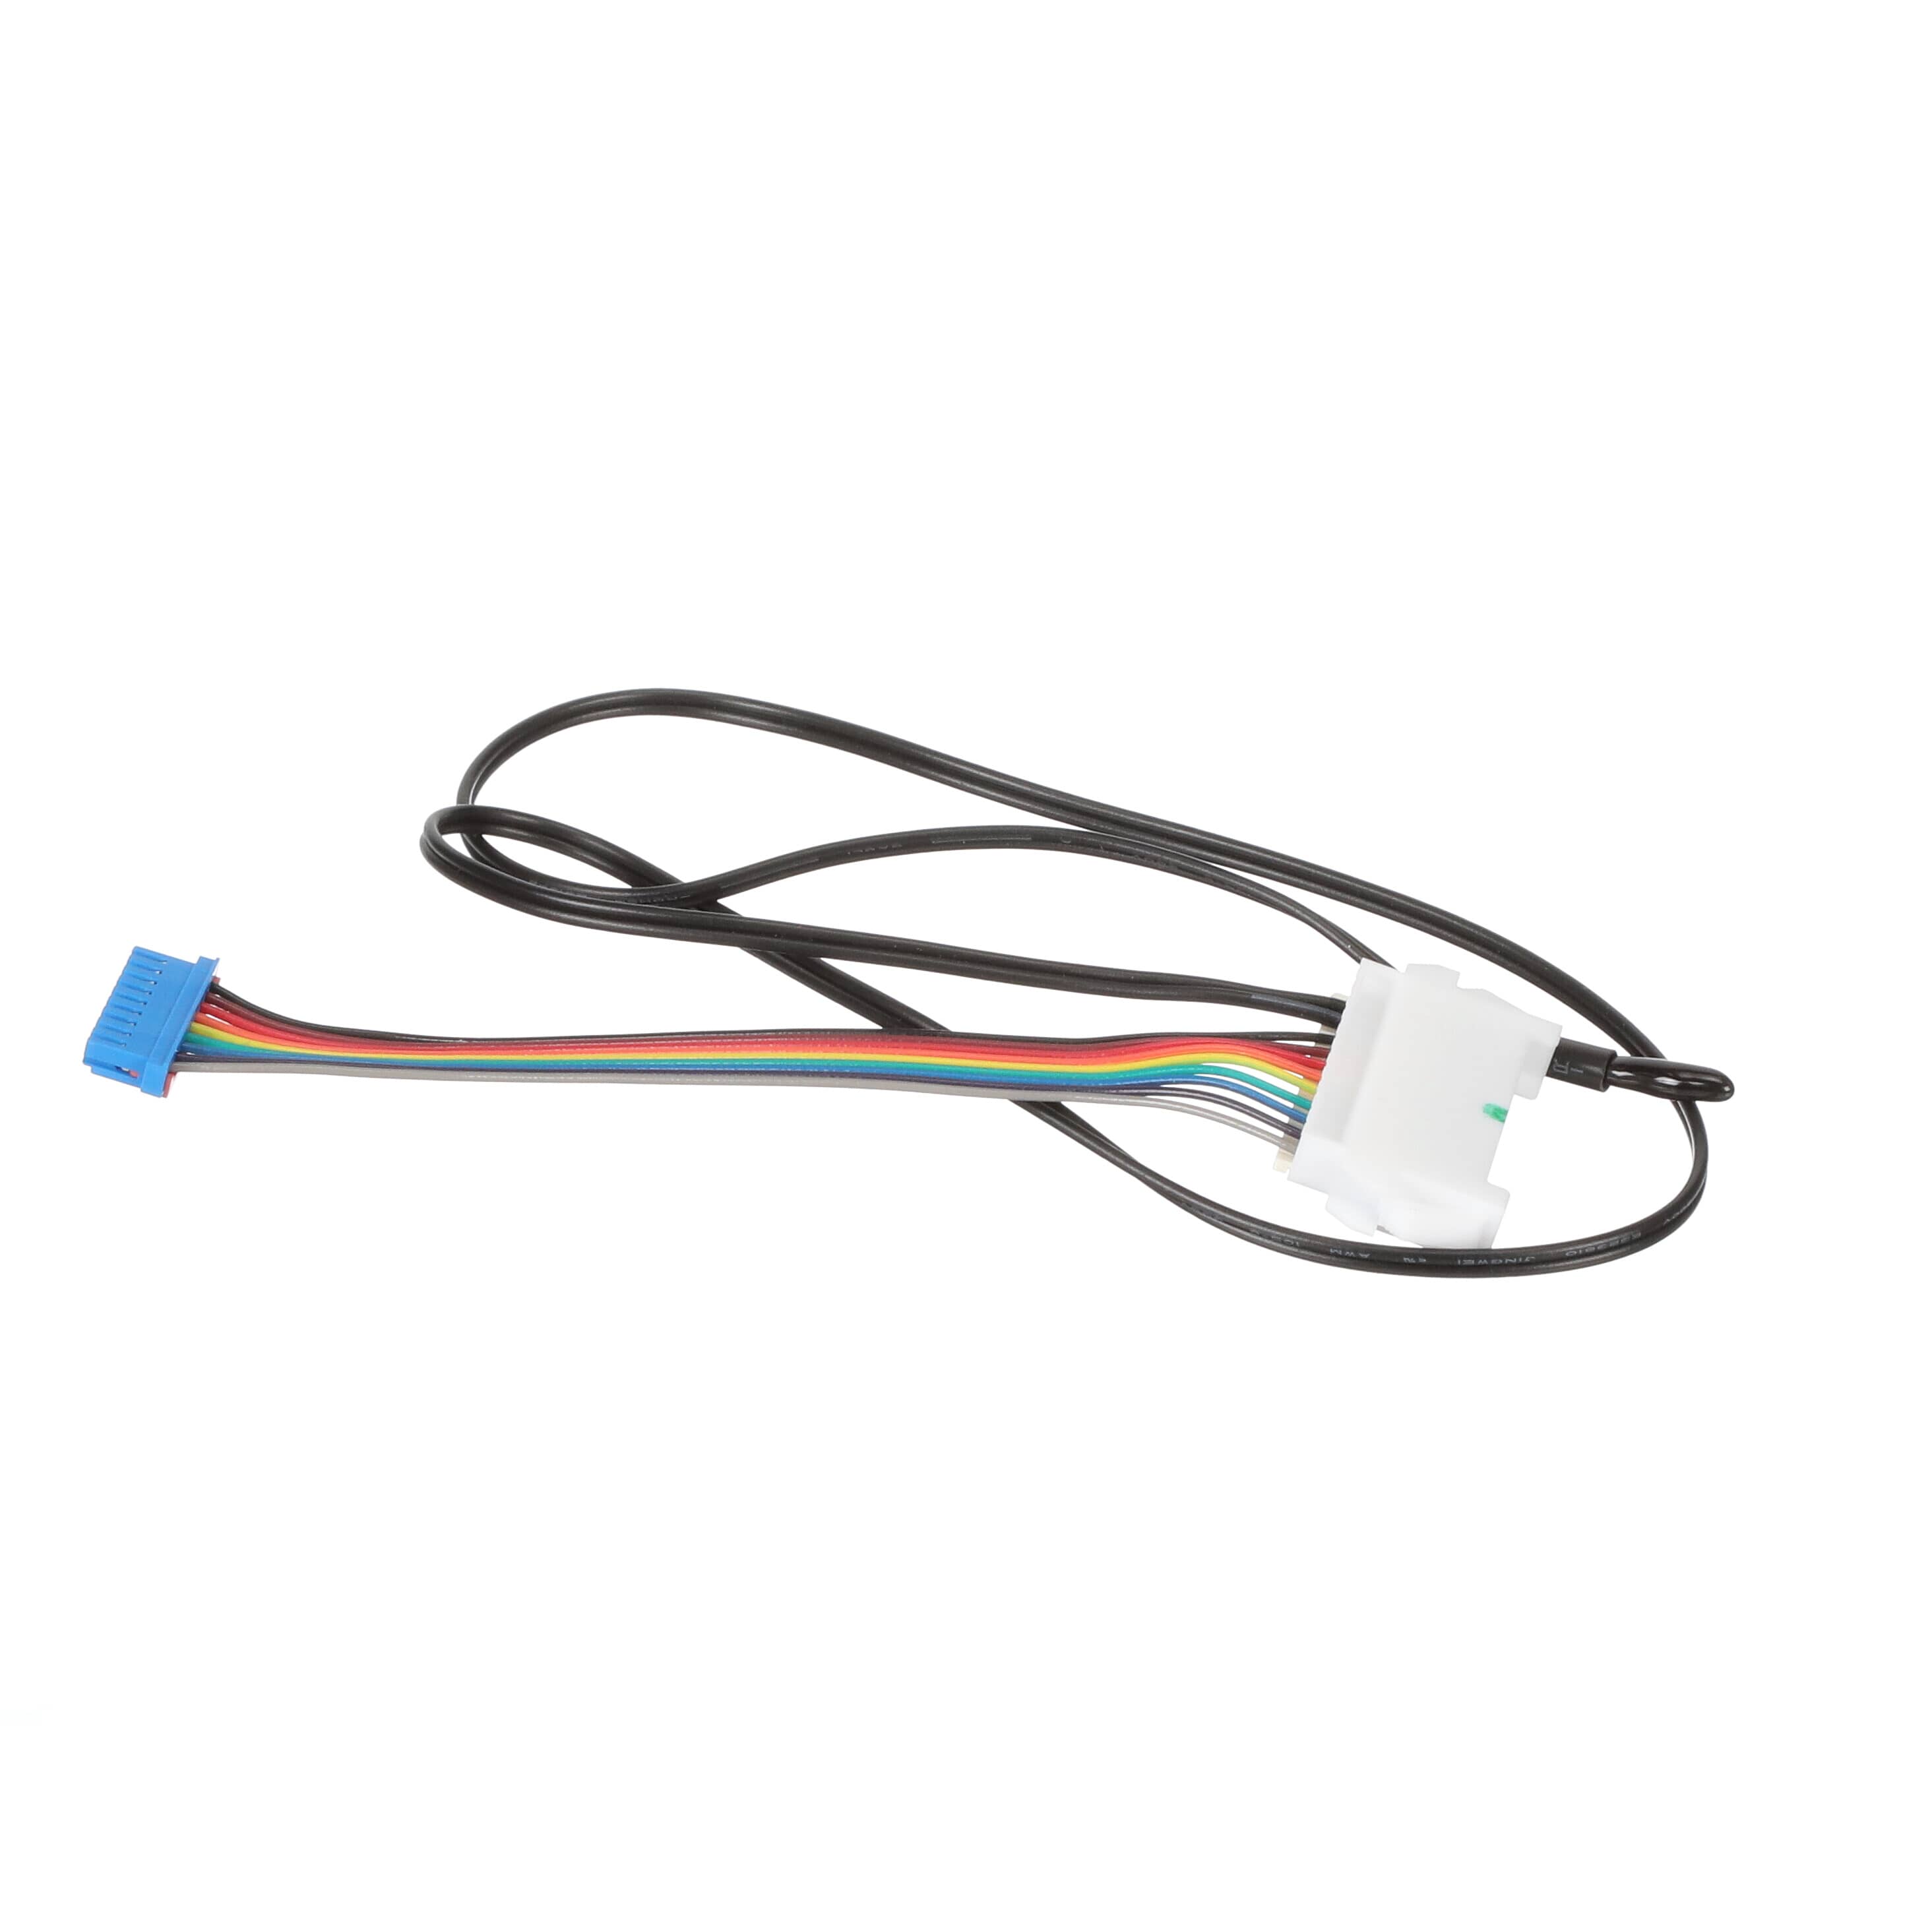 LG EAD63989002 Room Air Conditioner Wire Harness